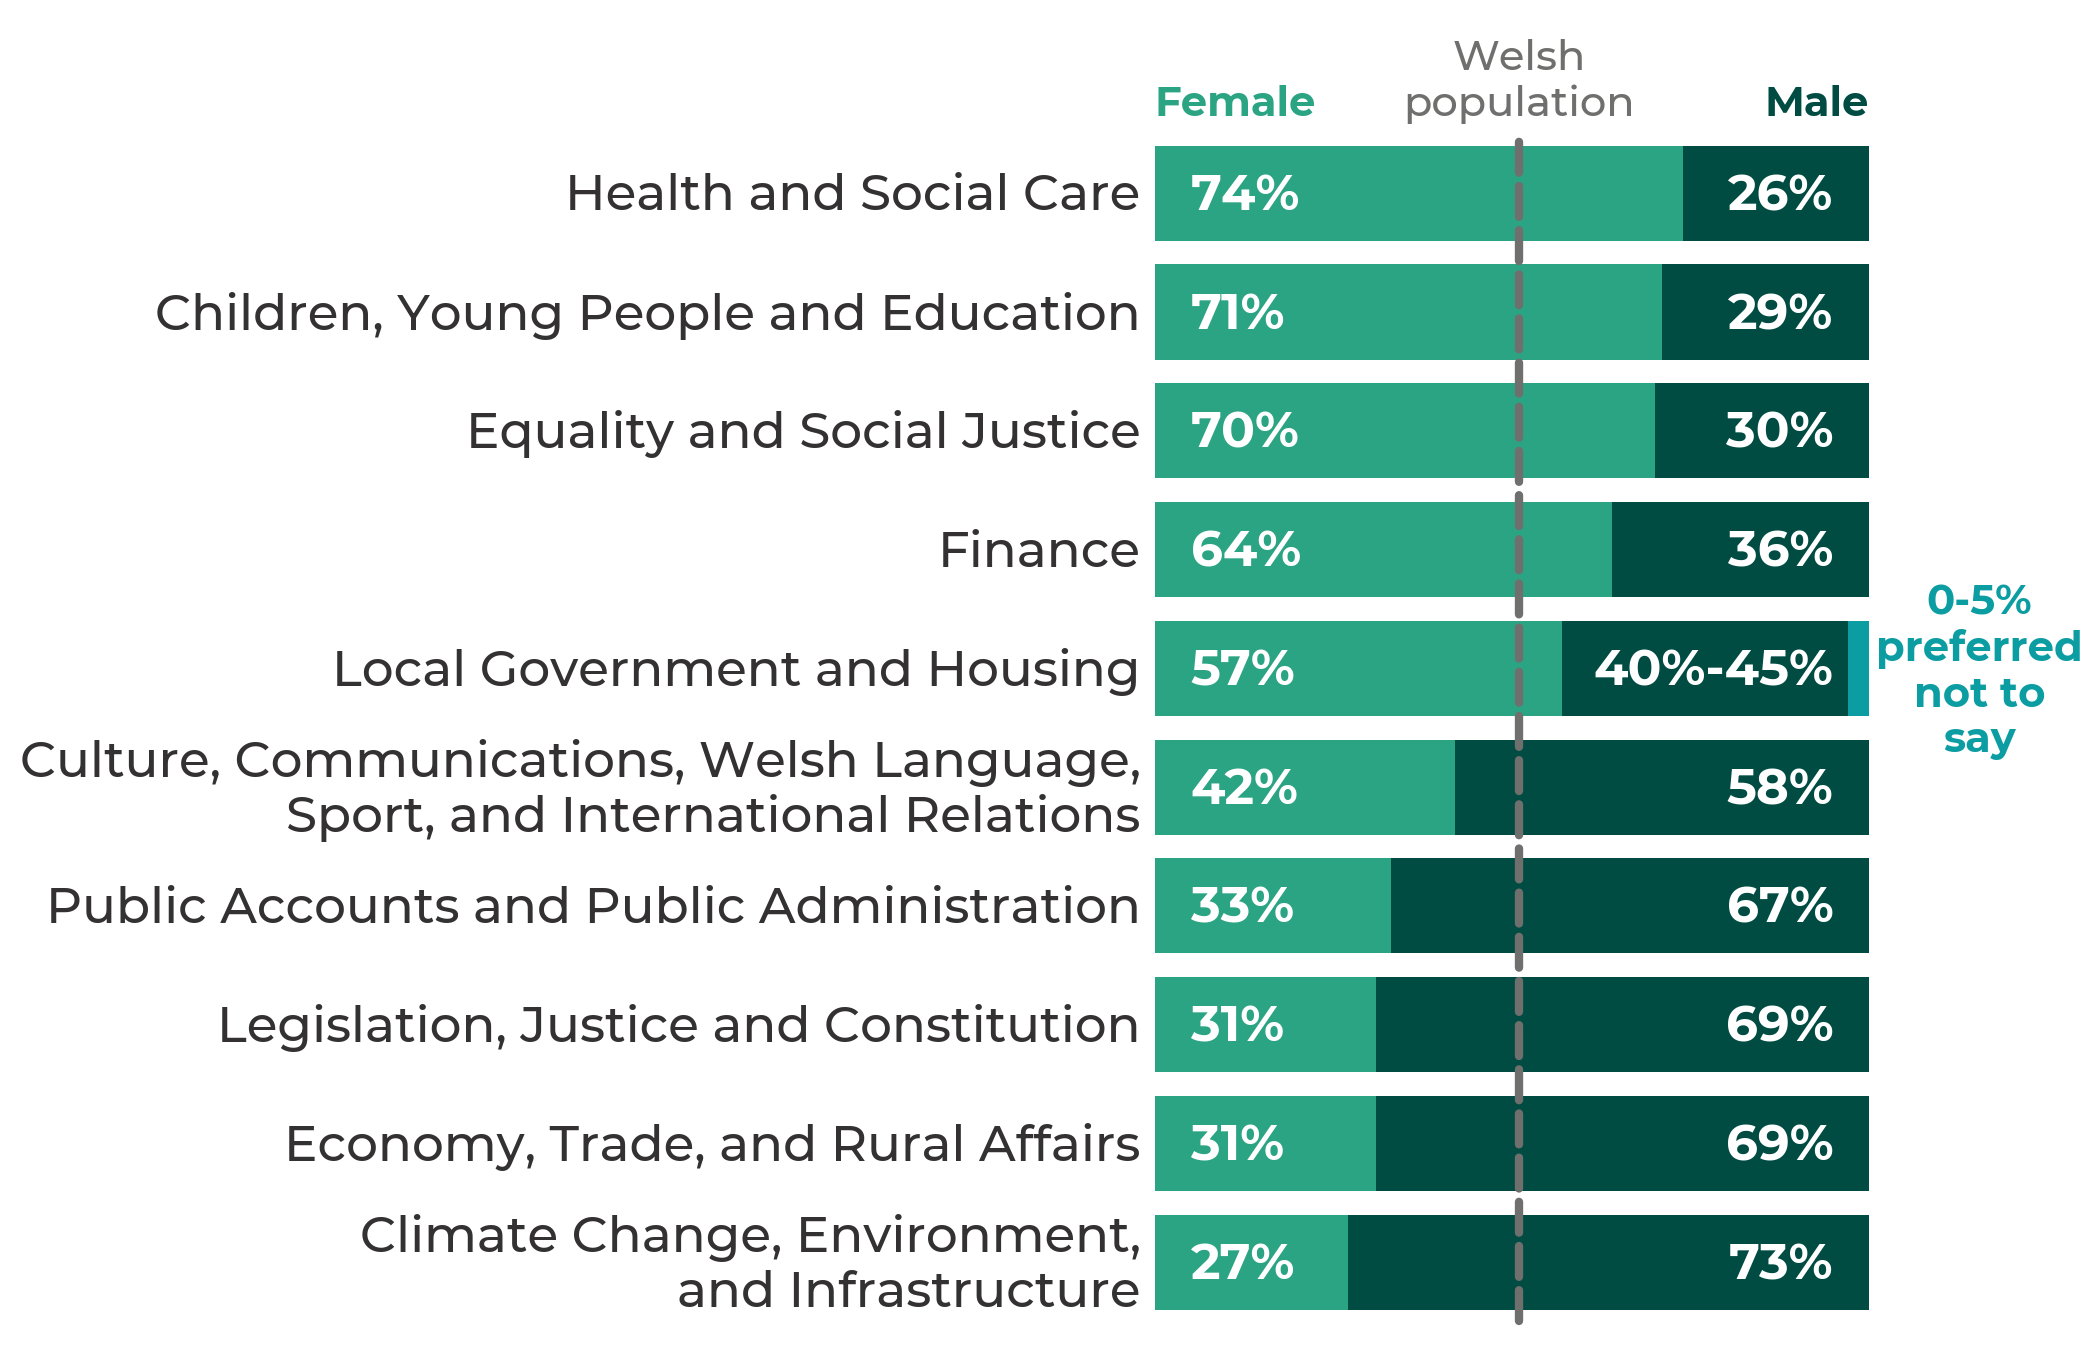 Graph of respondents who identified as female, by committee. Climate Change, Environment, and Infrastructure, 27%. Economy, Trade, and Rural Affairs, 31%. Legislation, Justice and Constitution, 31%. Public Accounts and Public Administration, 33%. Culture, Communications, Welsh Language, Sport, and International Relations, 42%. Local Government and Housing, 57%. Finance, 64%. Equality and Social Justice, 70%. Children, Young People and Education, 71%. Health and Social Care, 74%.